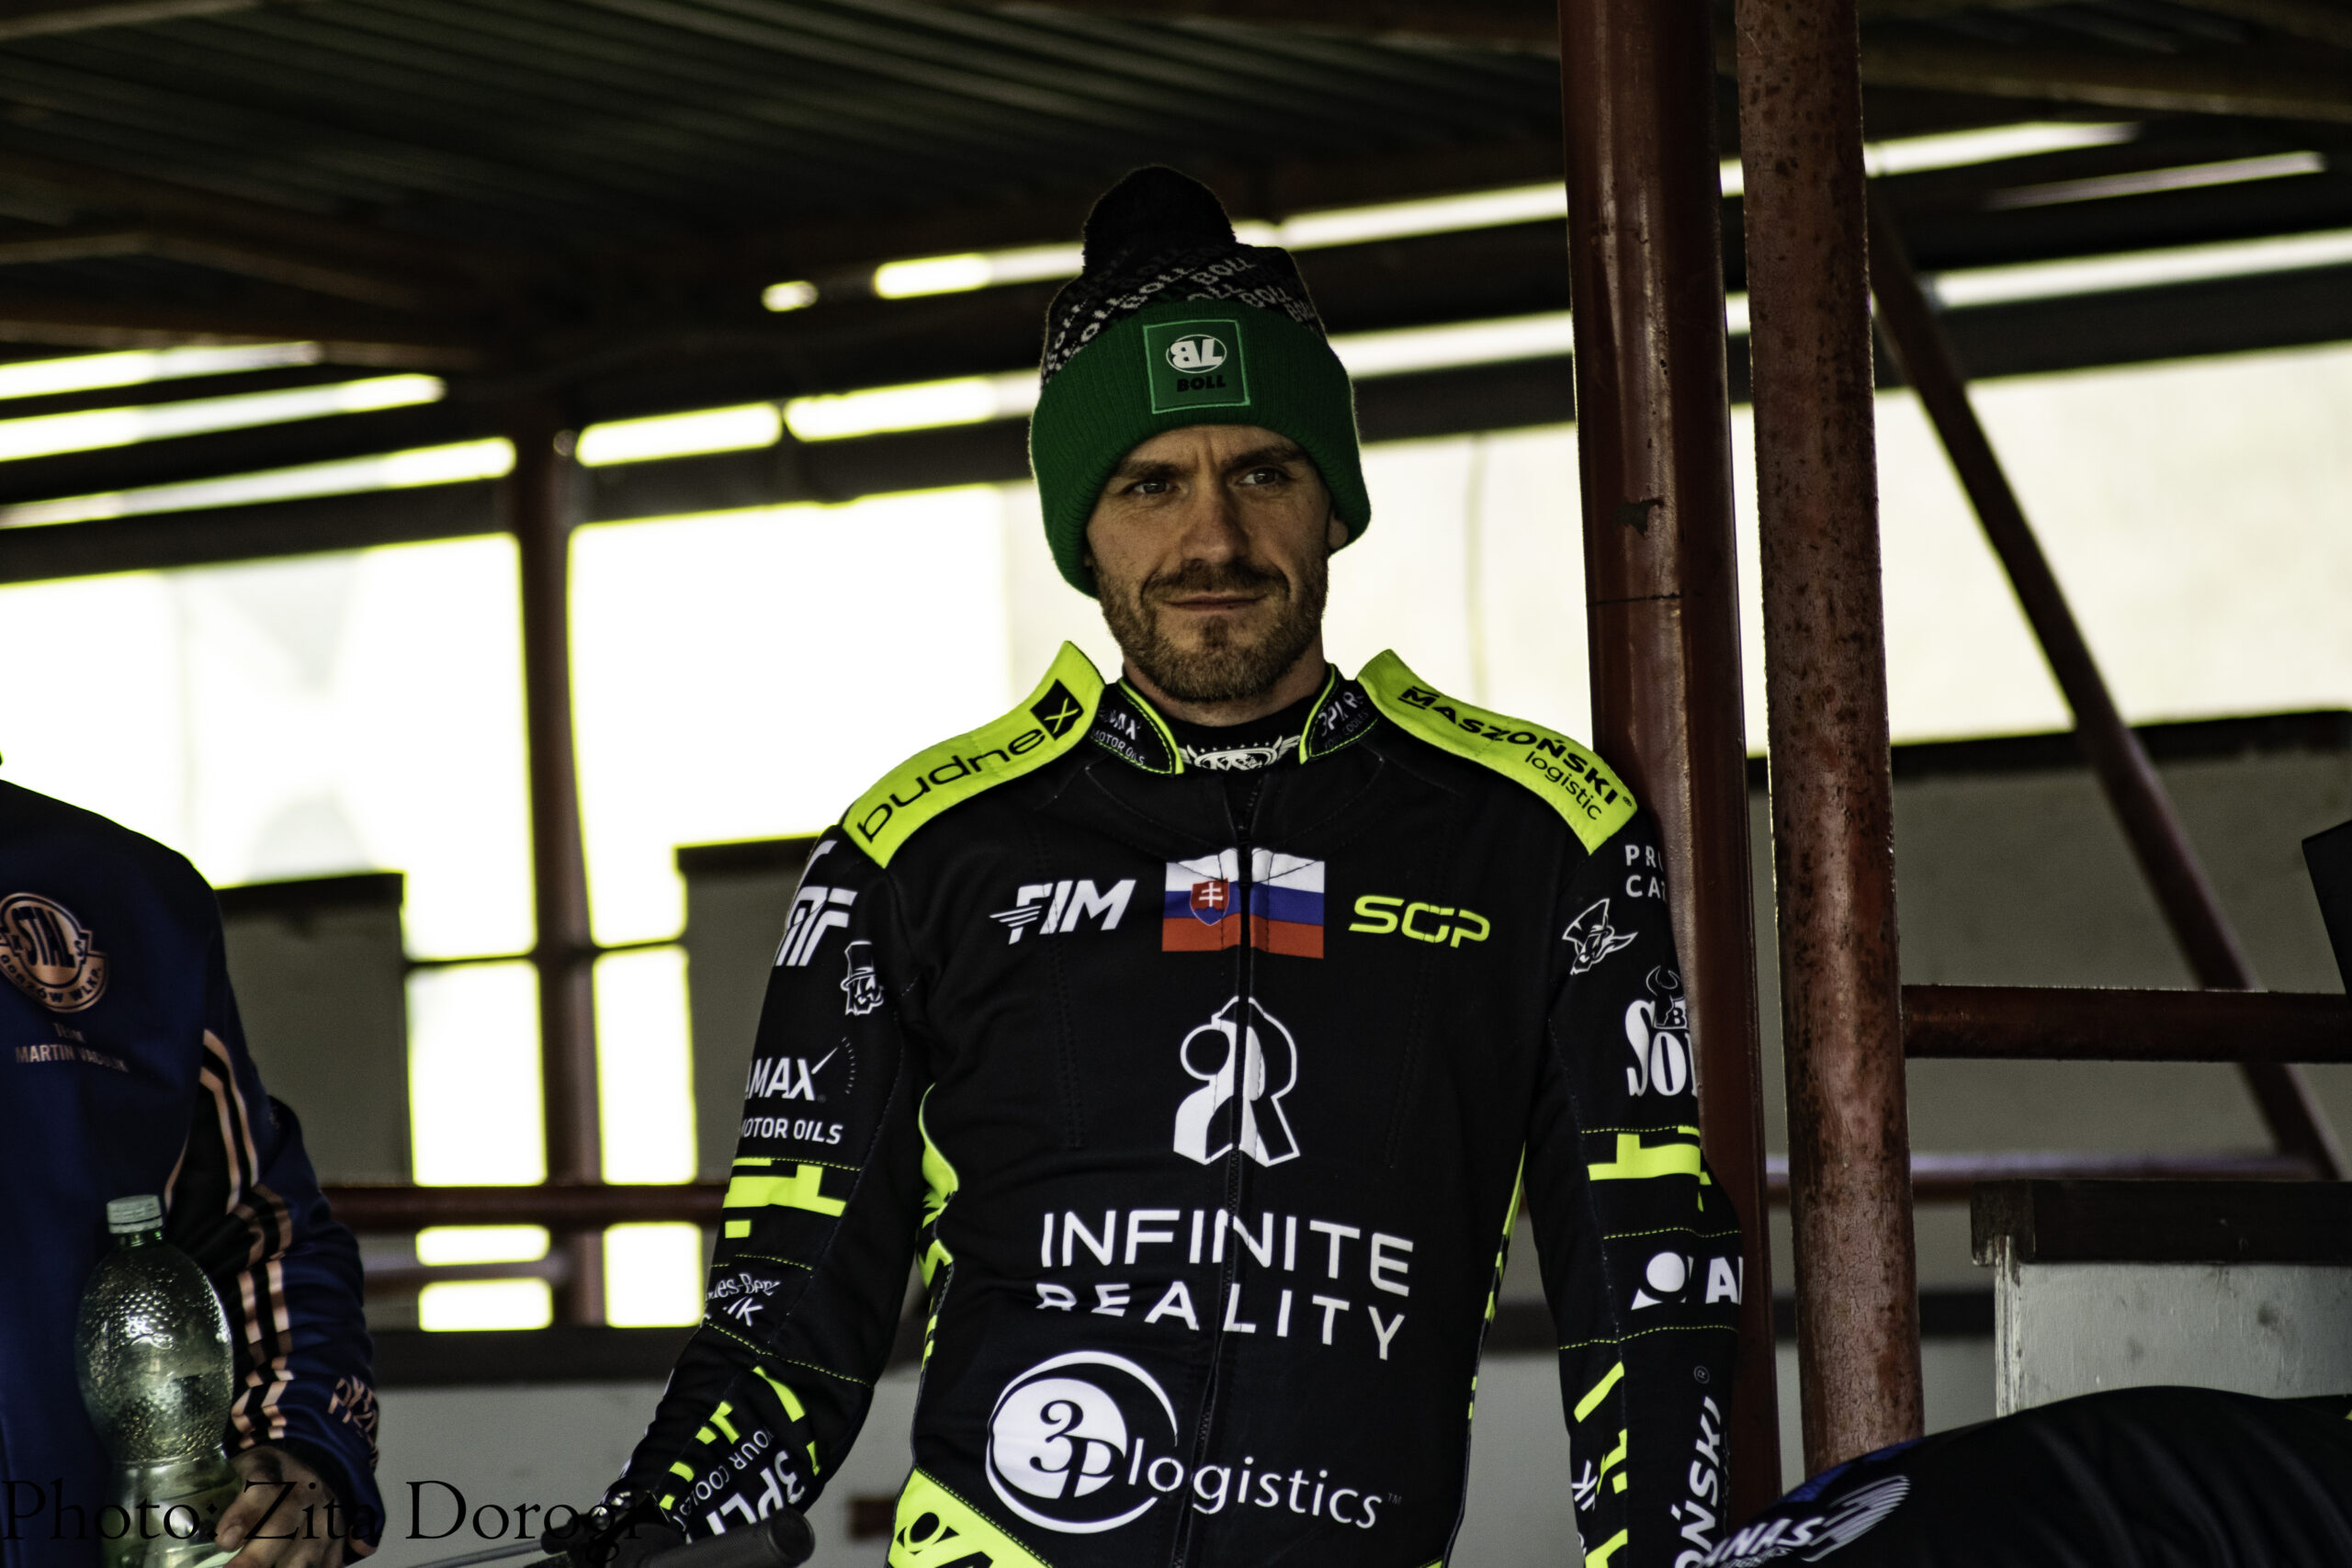 Martin Vaculik has gone for a Camp of 3P Logistics mark